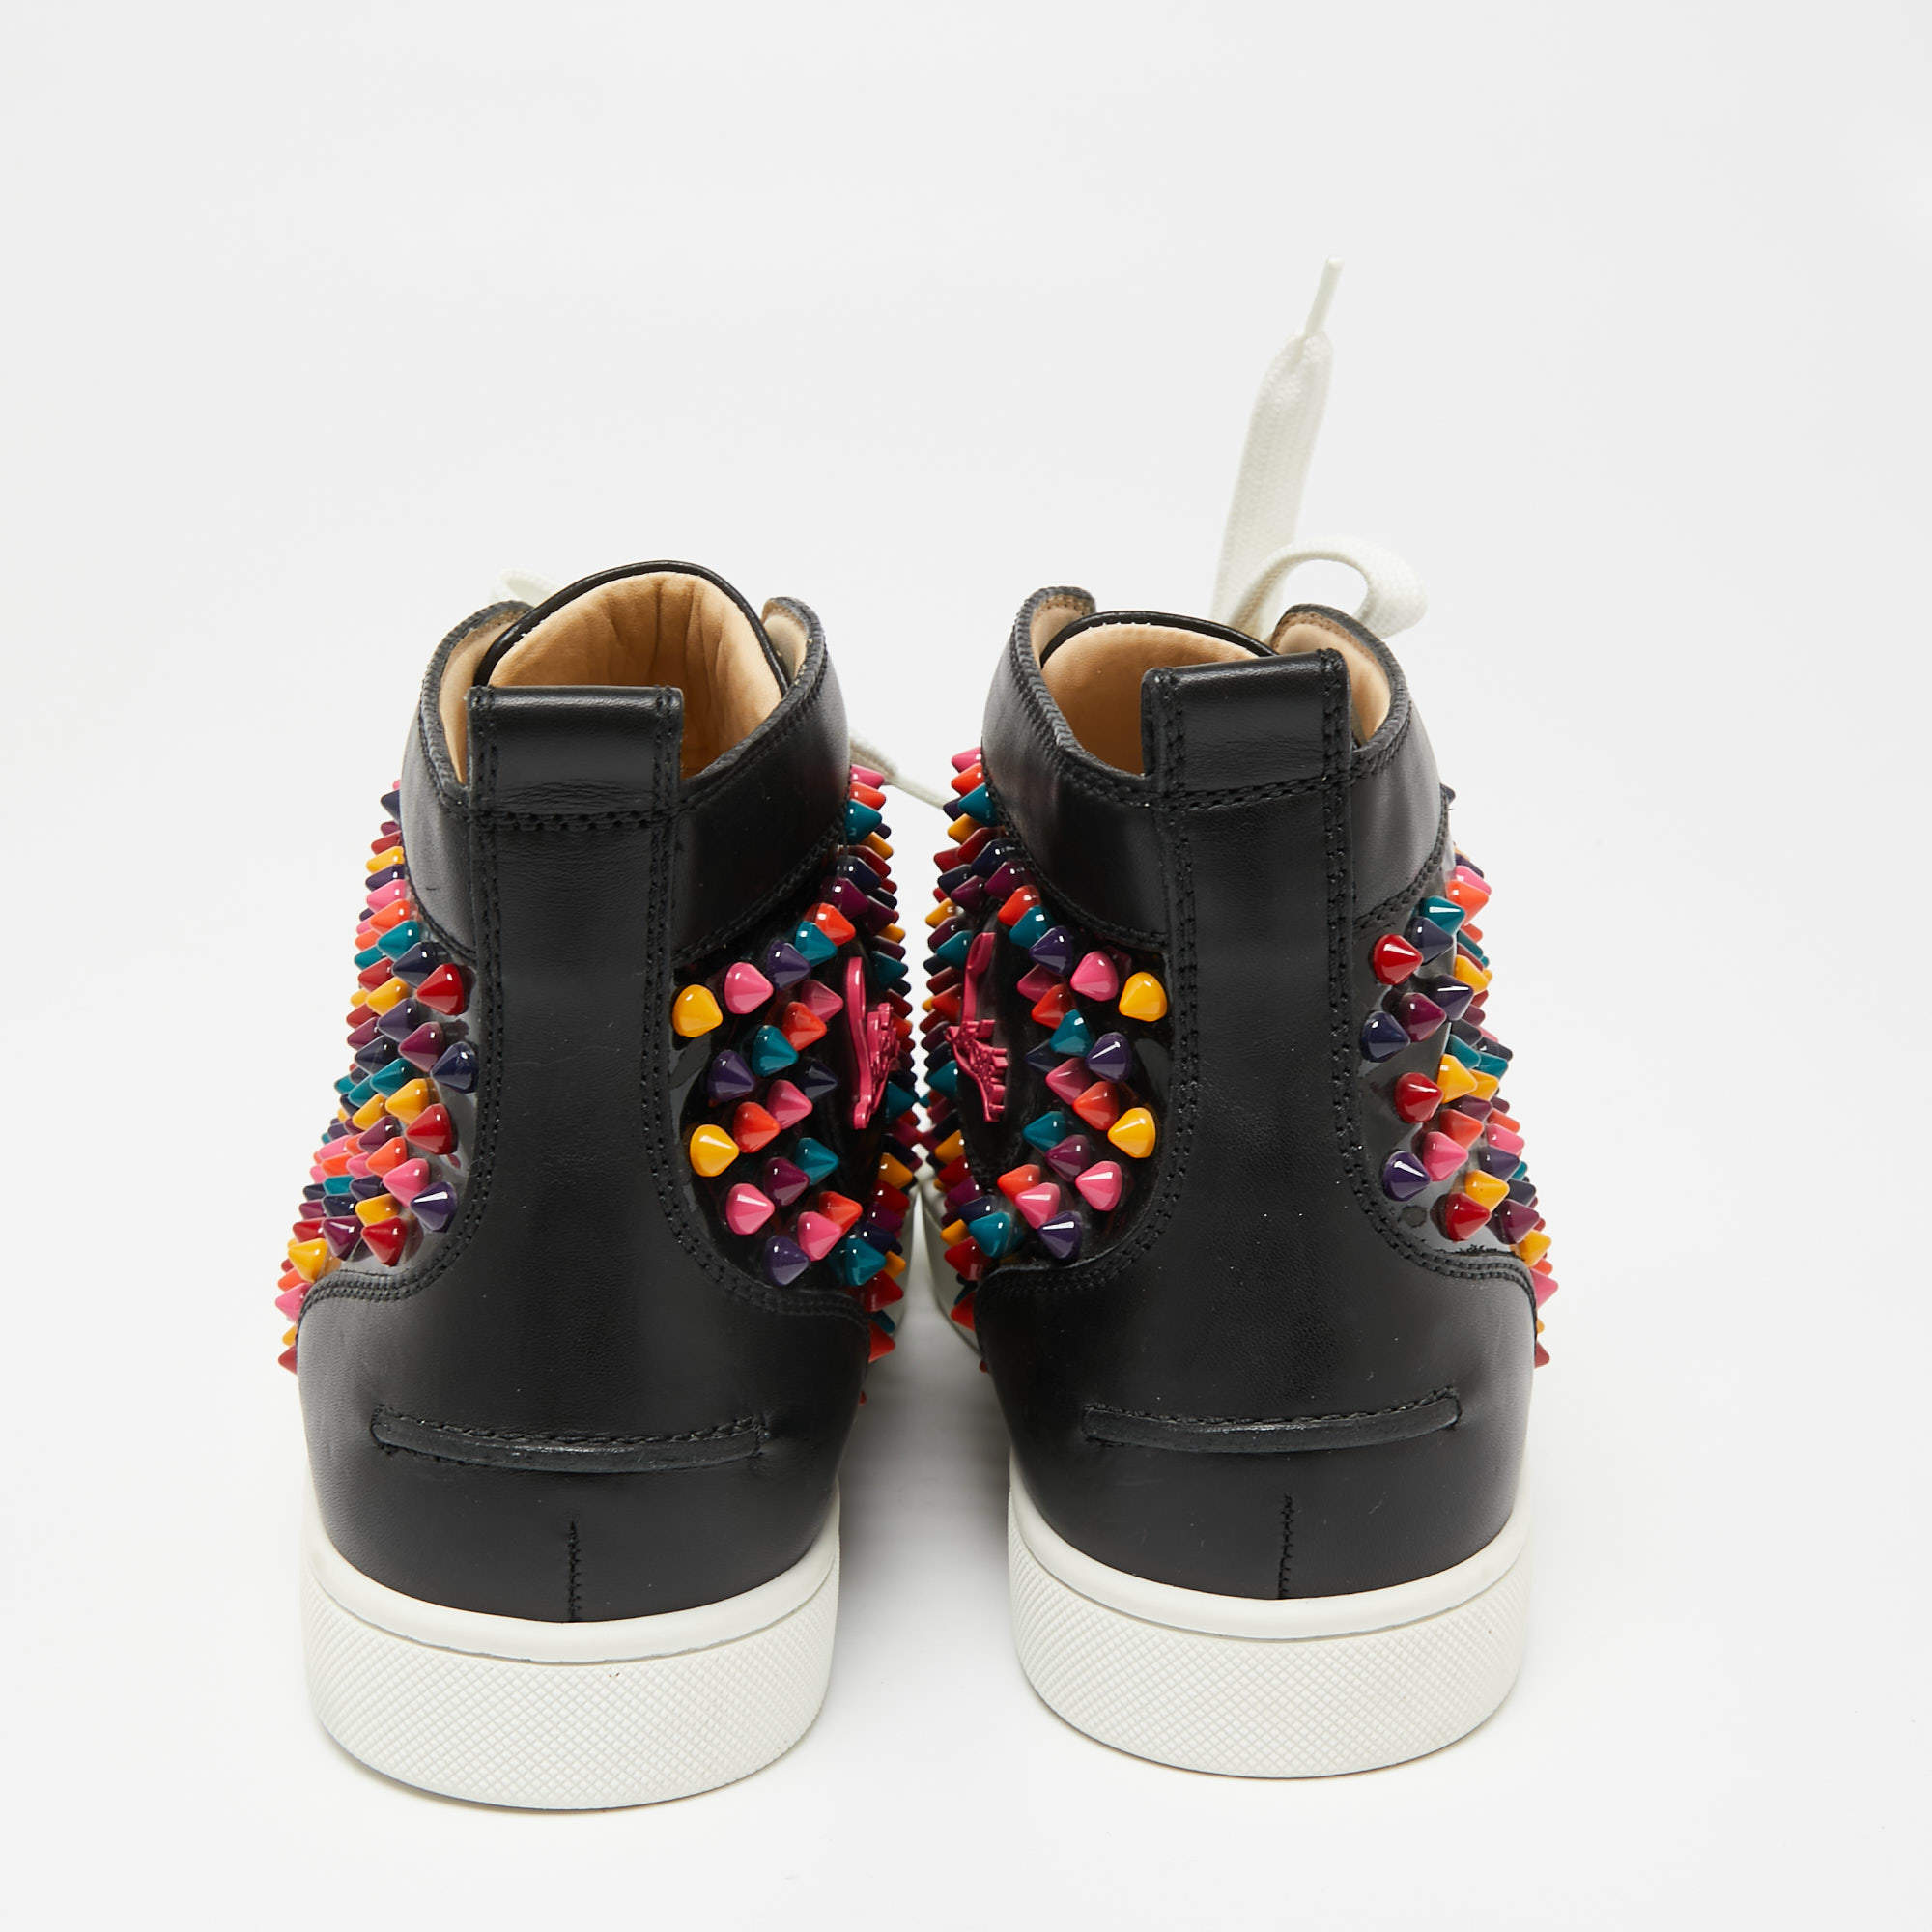 Christian Louboutin Black Leather Multicolor Spikes High-Top Sneakers Size  12/42.5 - Yoogi's Closet